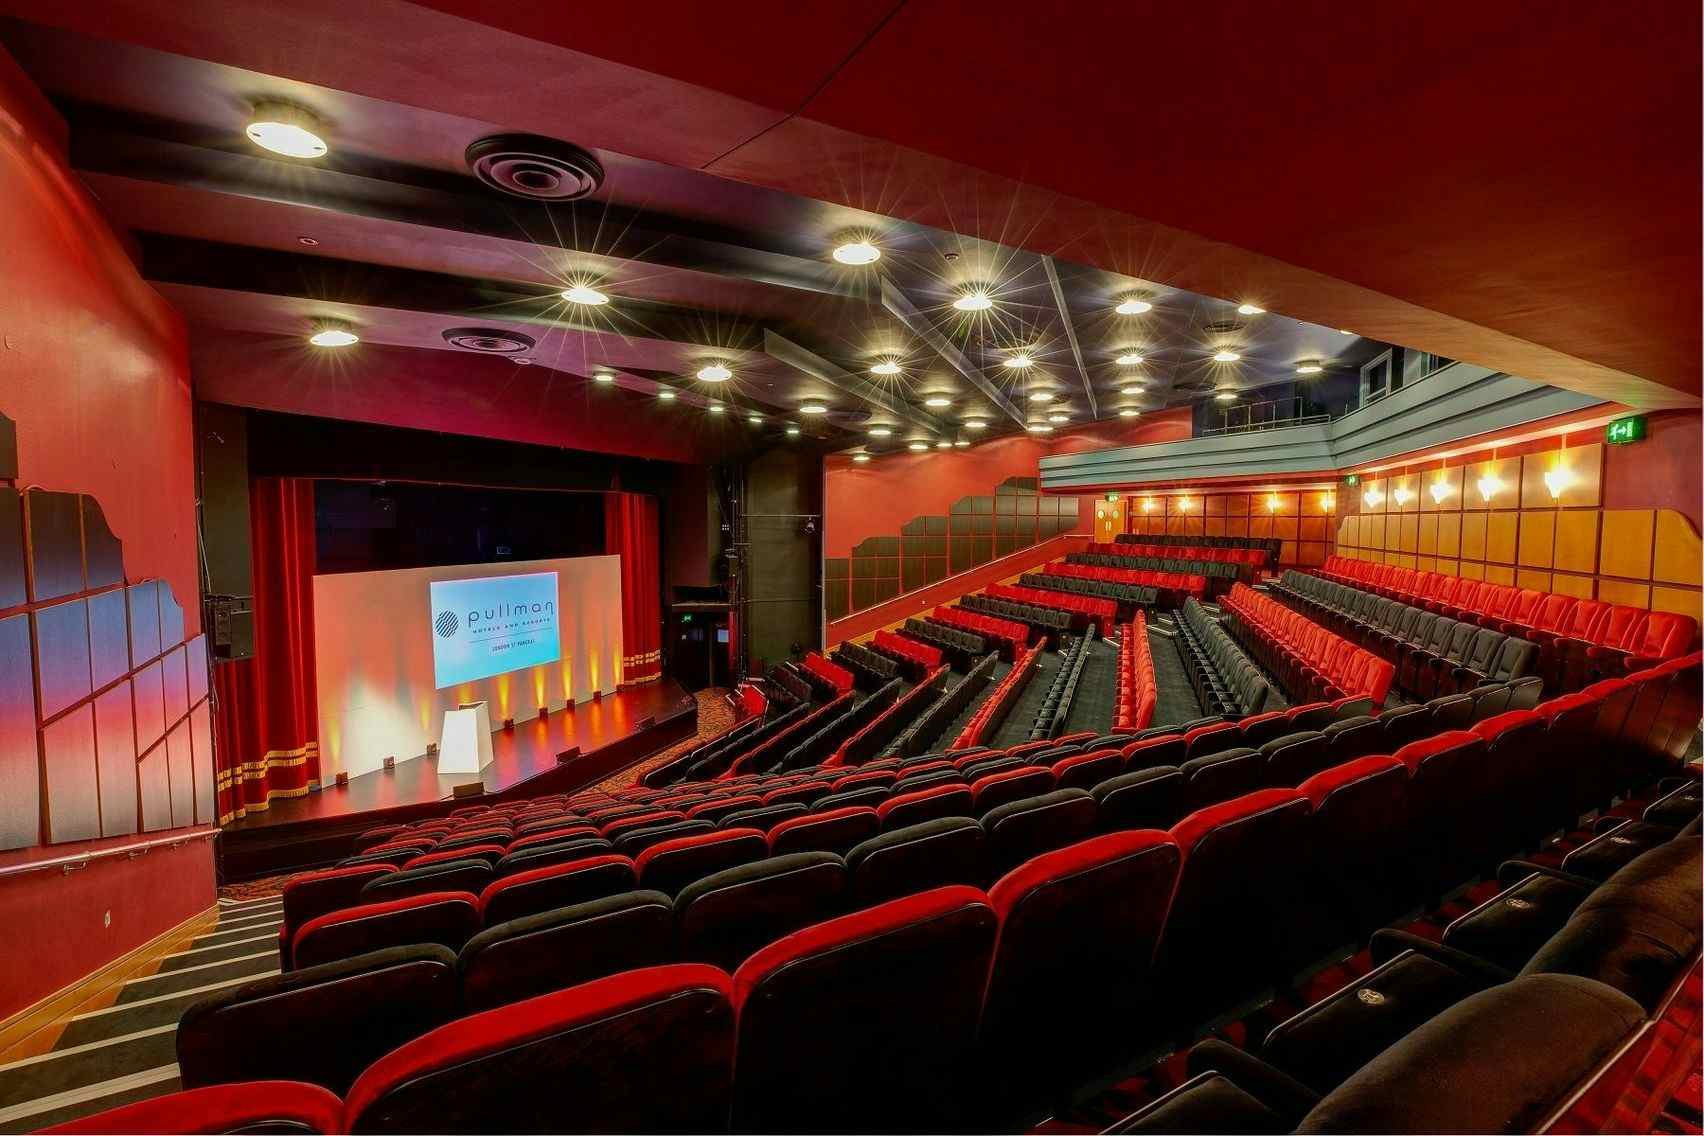 Book Shaw Theatre at Pullman London St Pancras. A London Venue for Hire